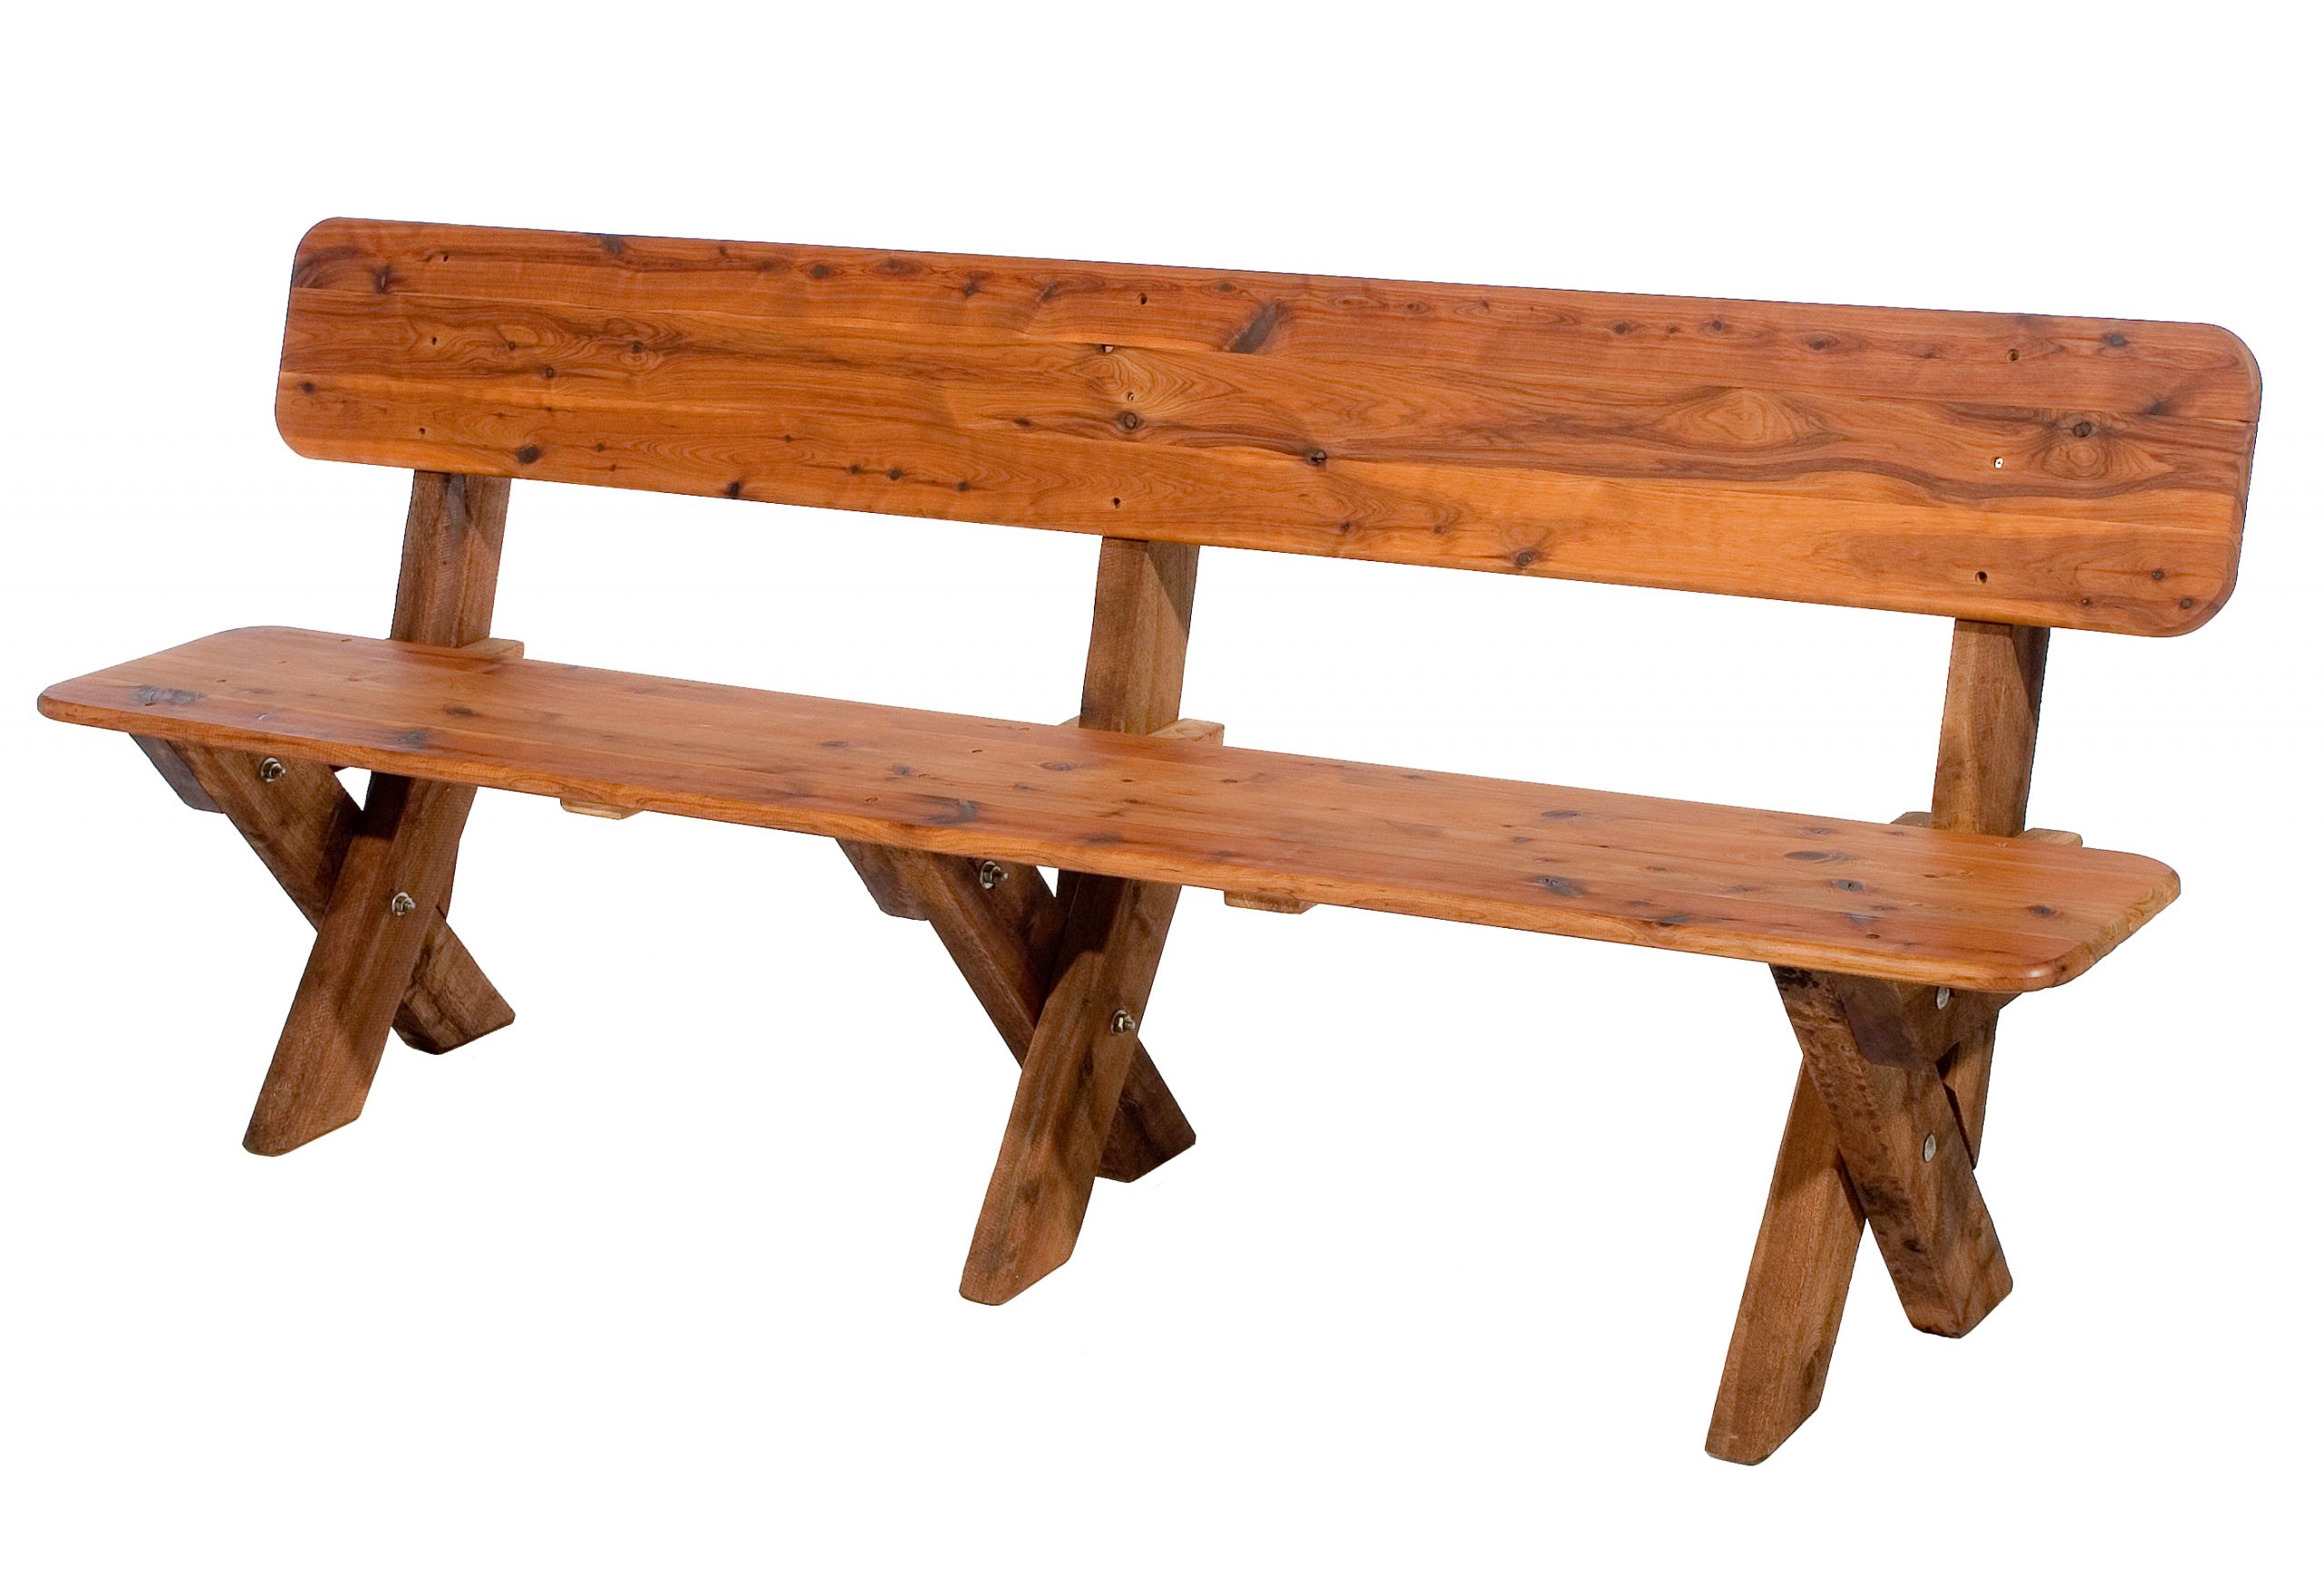 Four Seat High Back Cypress Outdoor Timber Bench available to order now